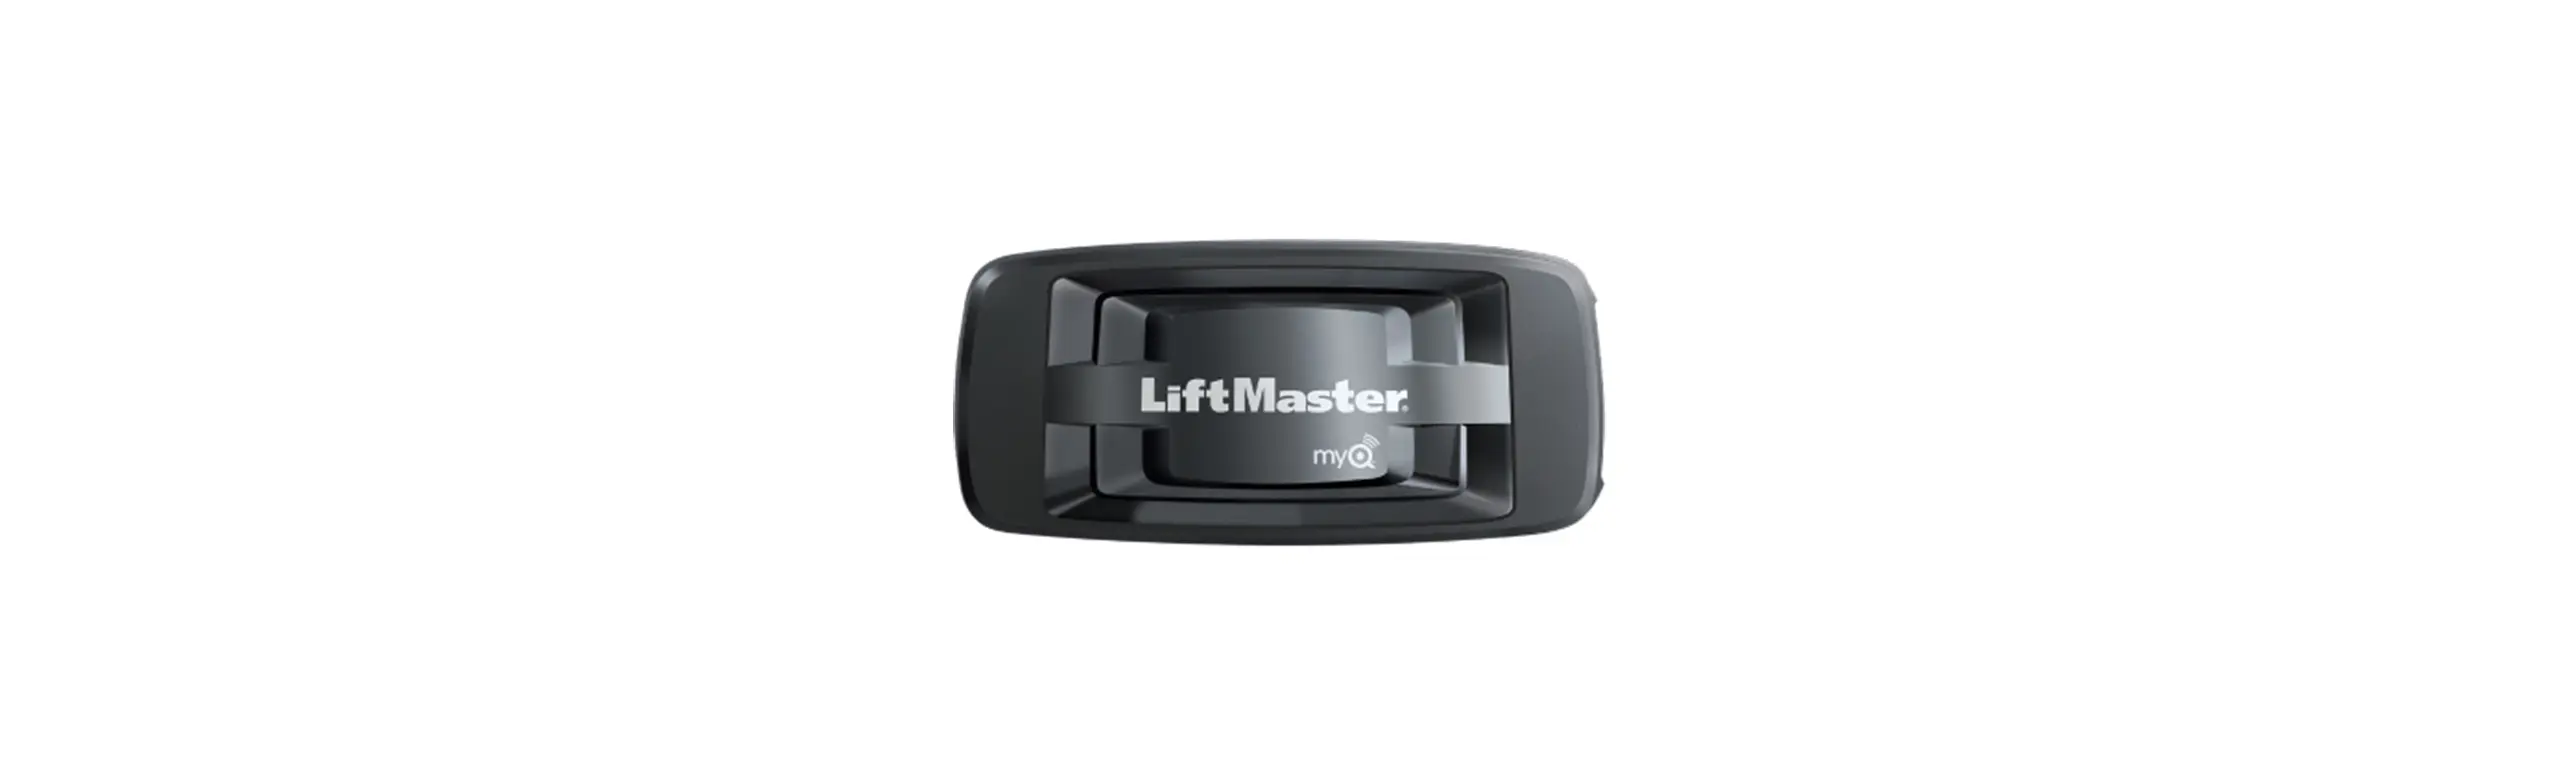 LiftMaster 823LM Remote Control Light Switch (MyQ)